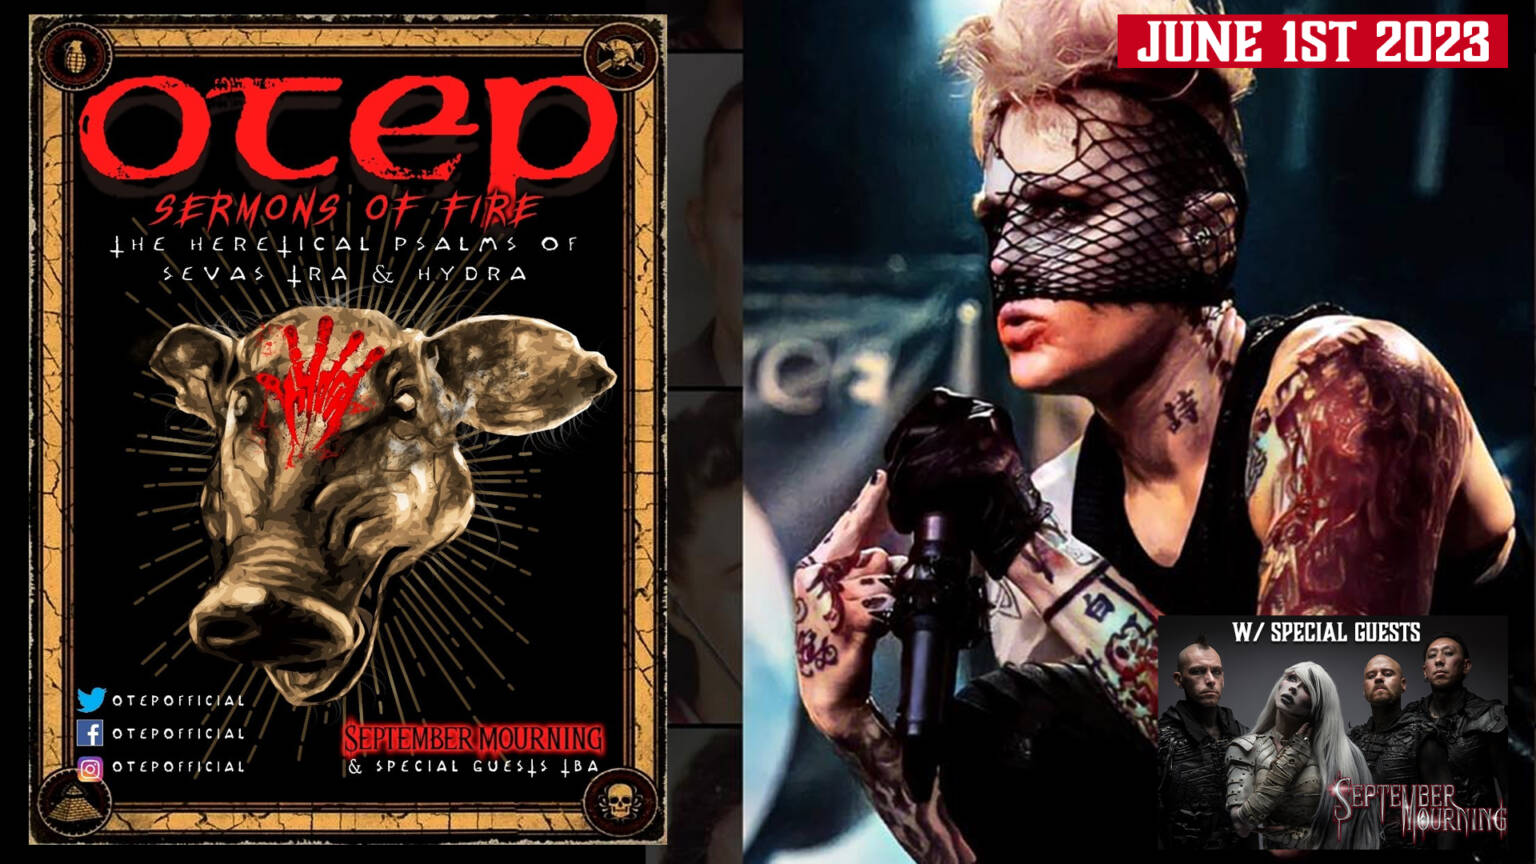 OTEP & SEPTEMBER MOURNING THU. JUNE 1 2023 7PM ALL AGES SHOW The